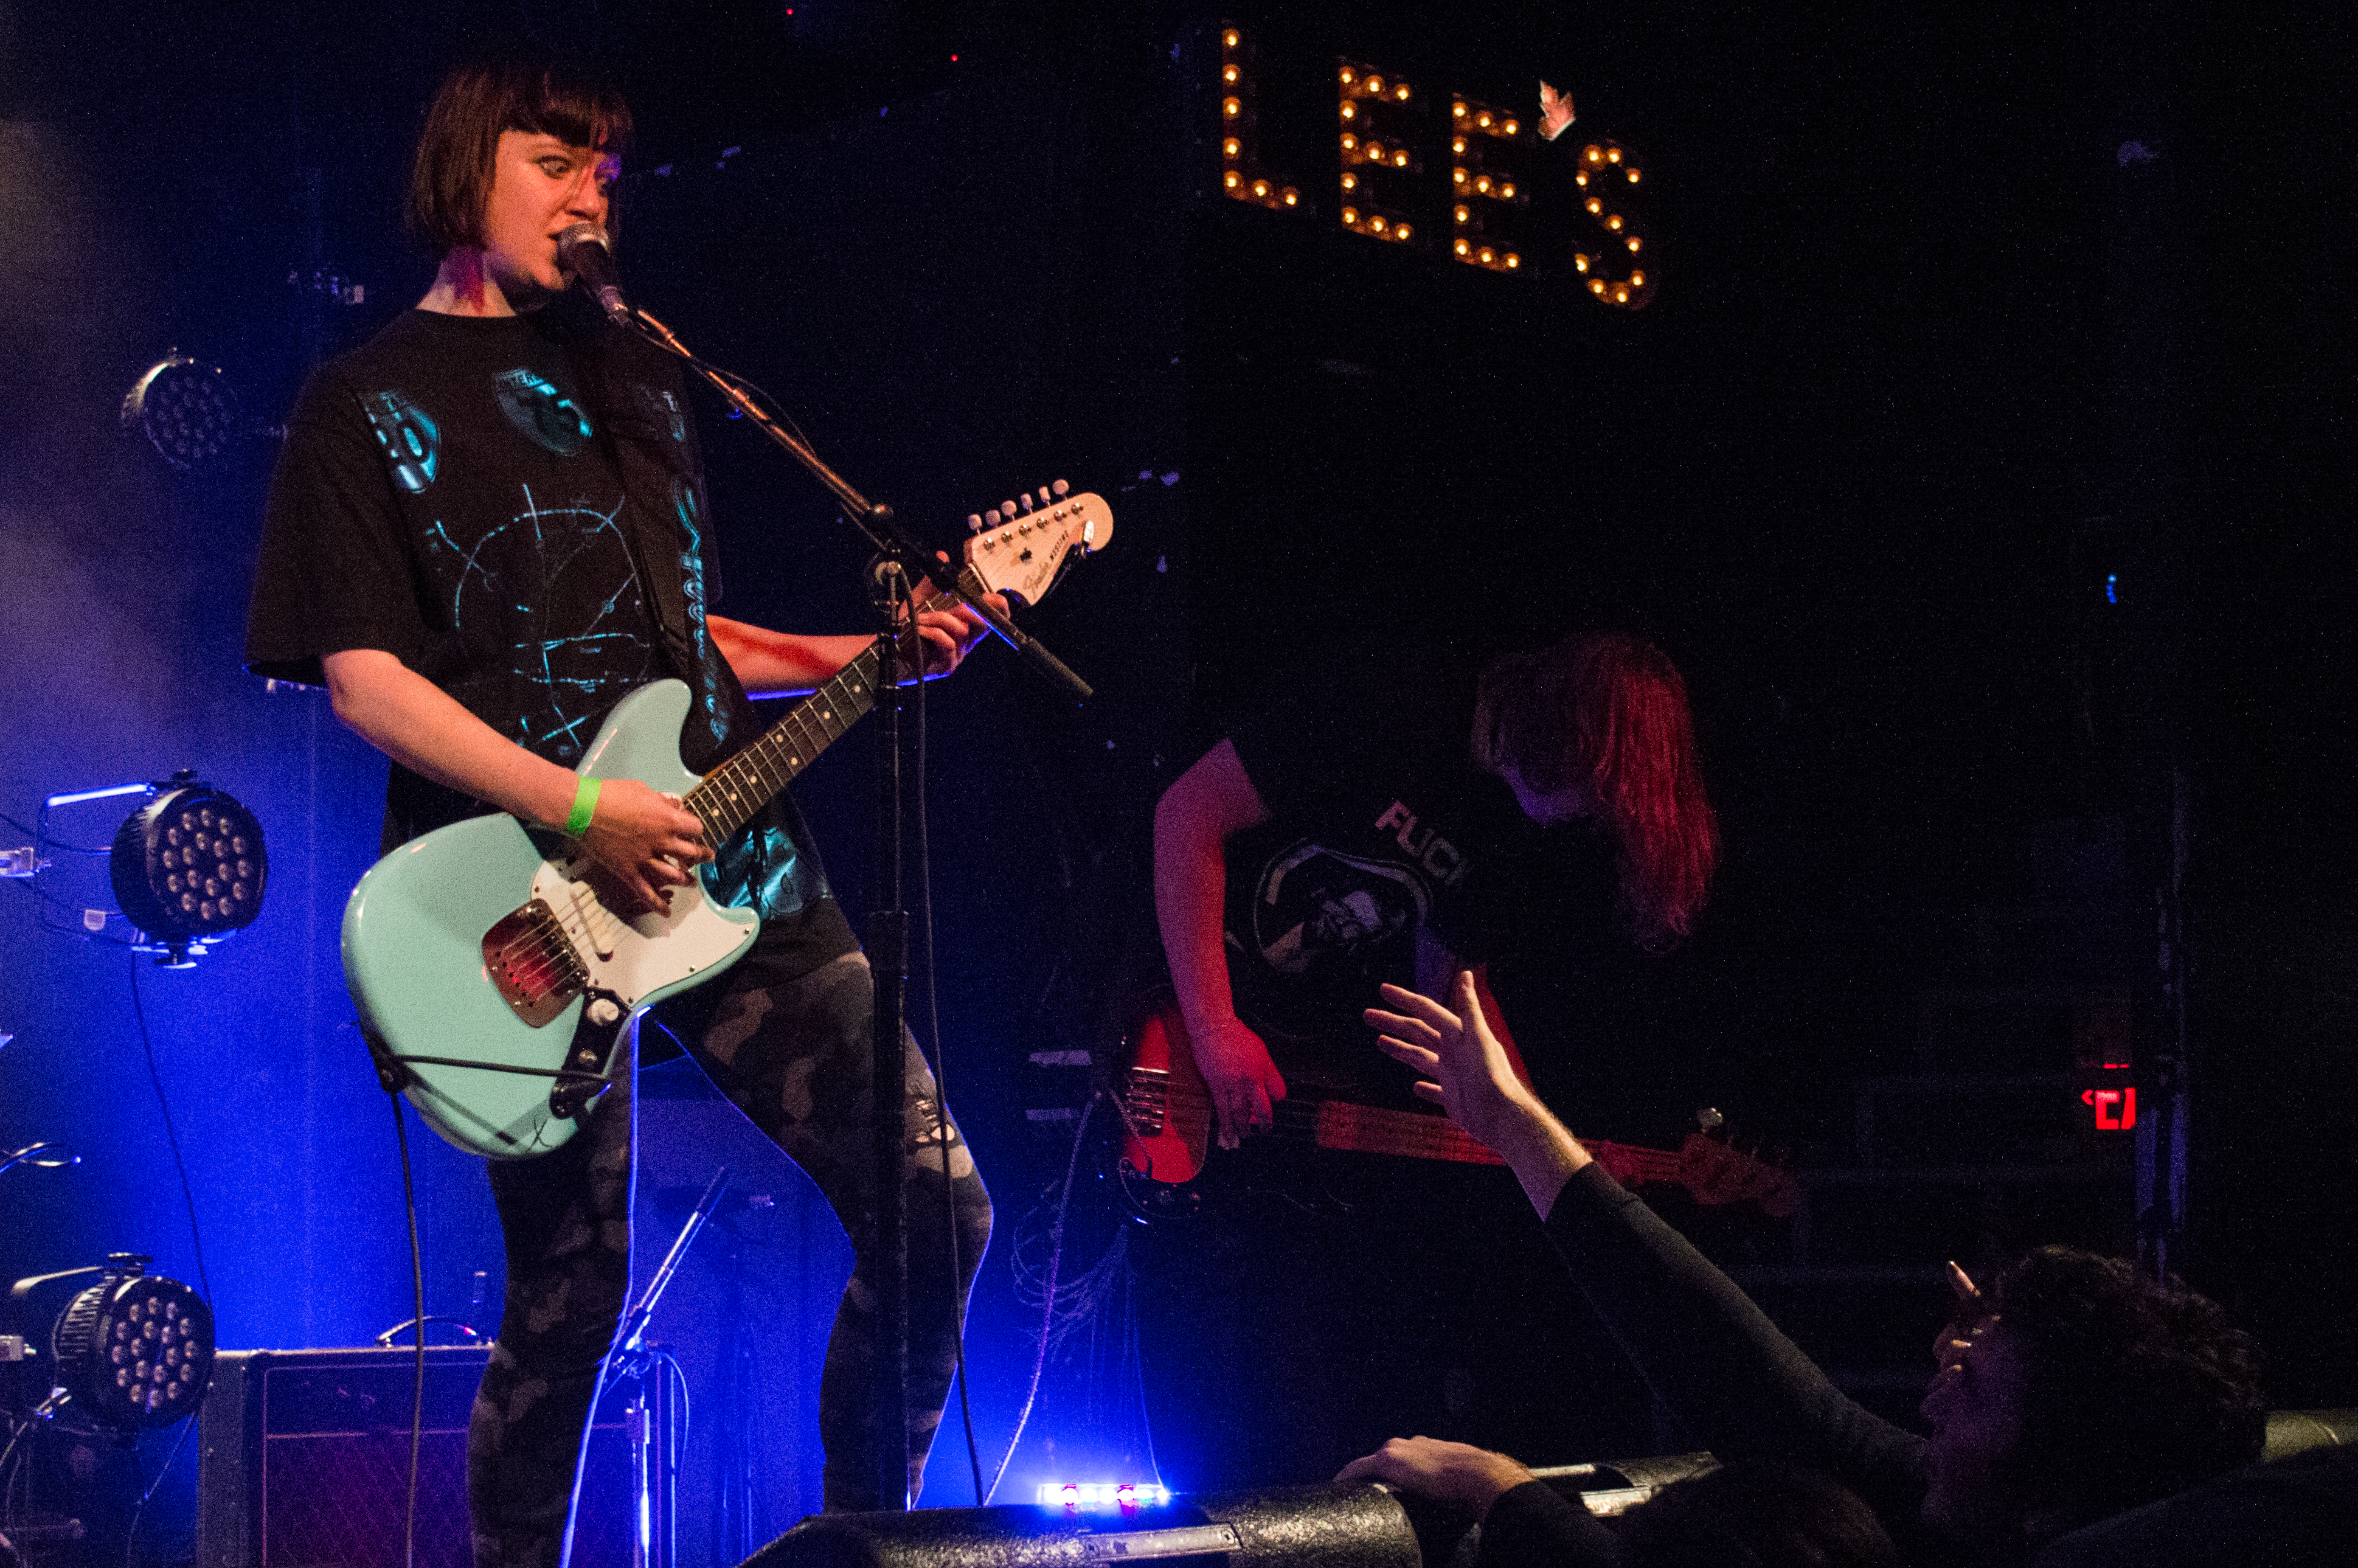 Dilly Dally, Beliefs live at Lee's Palace in Toronto, ON (December 2, 2016)